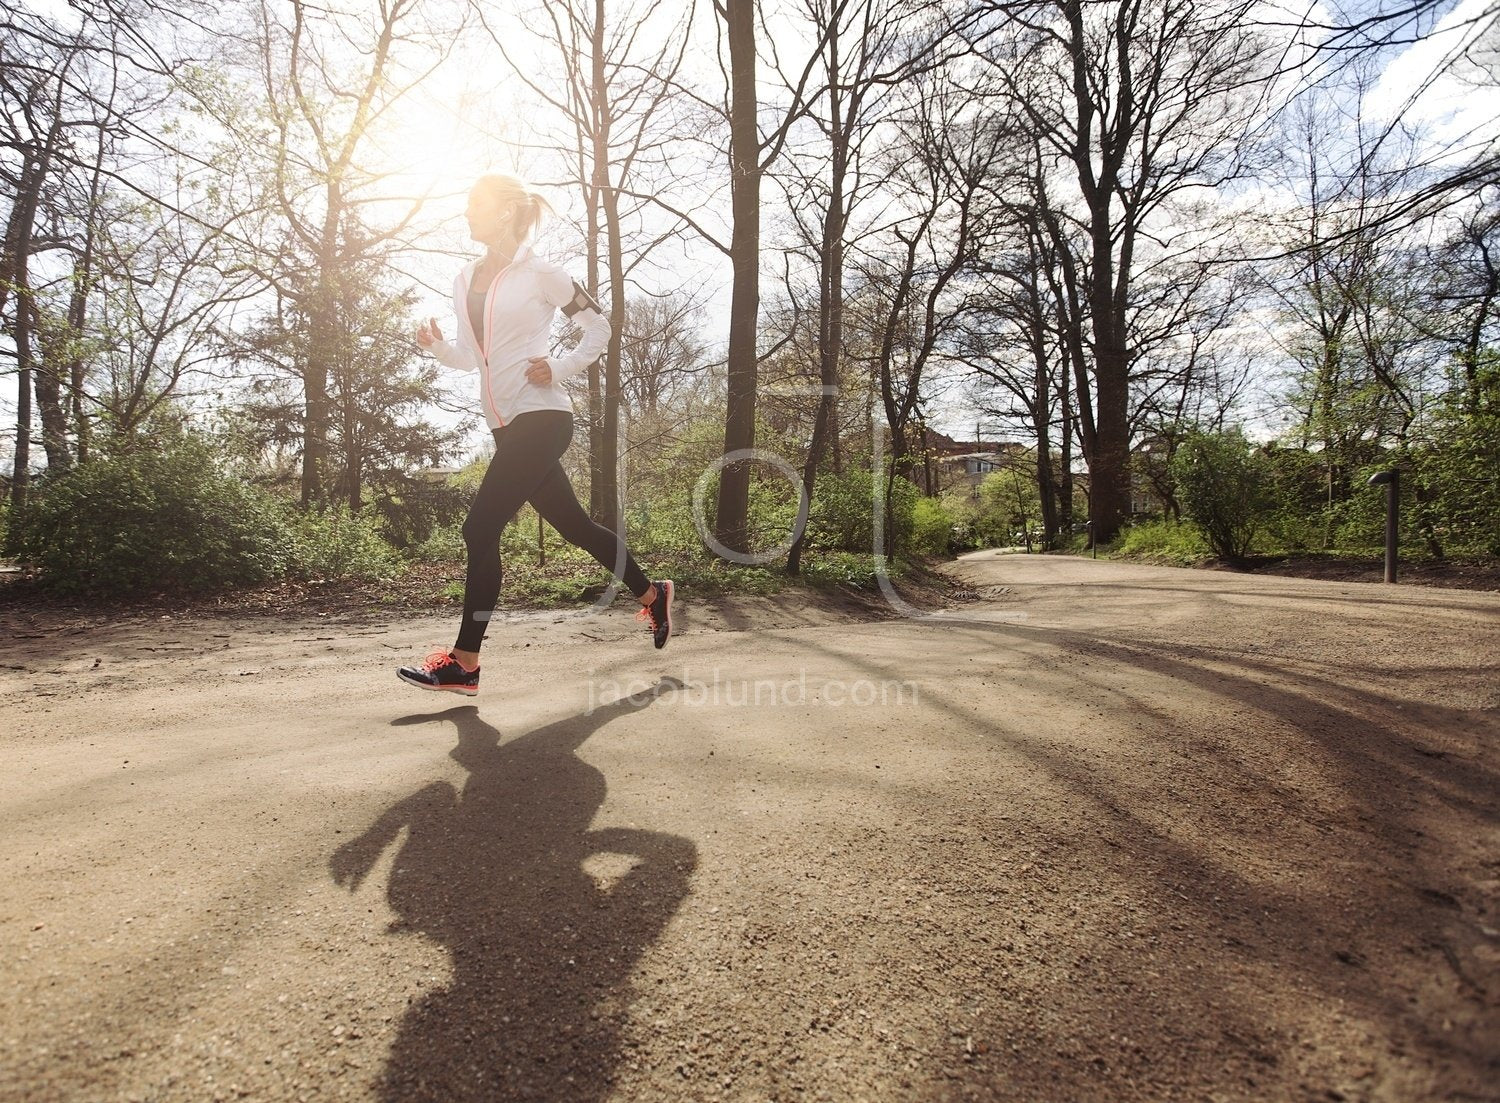 Woman Jogging In Public Park by Microgen Images/science Photo Library